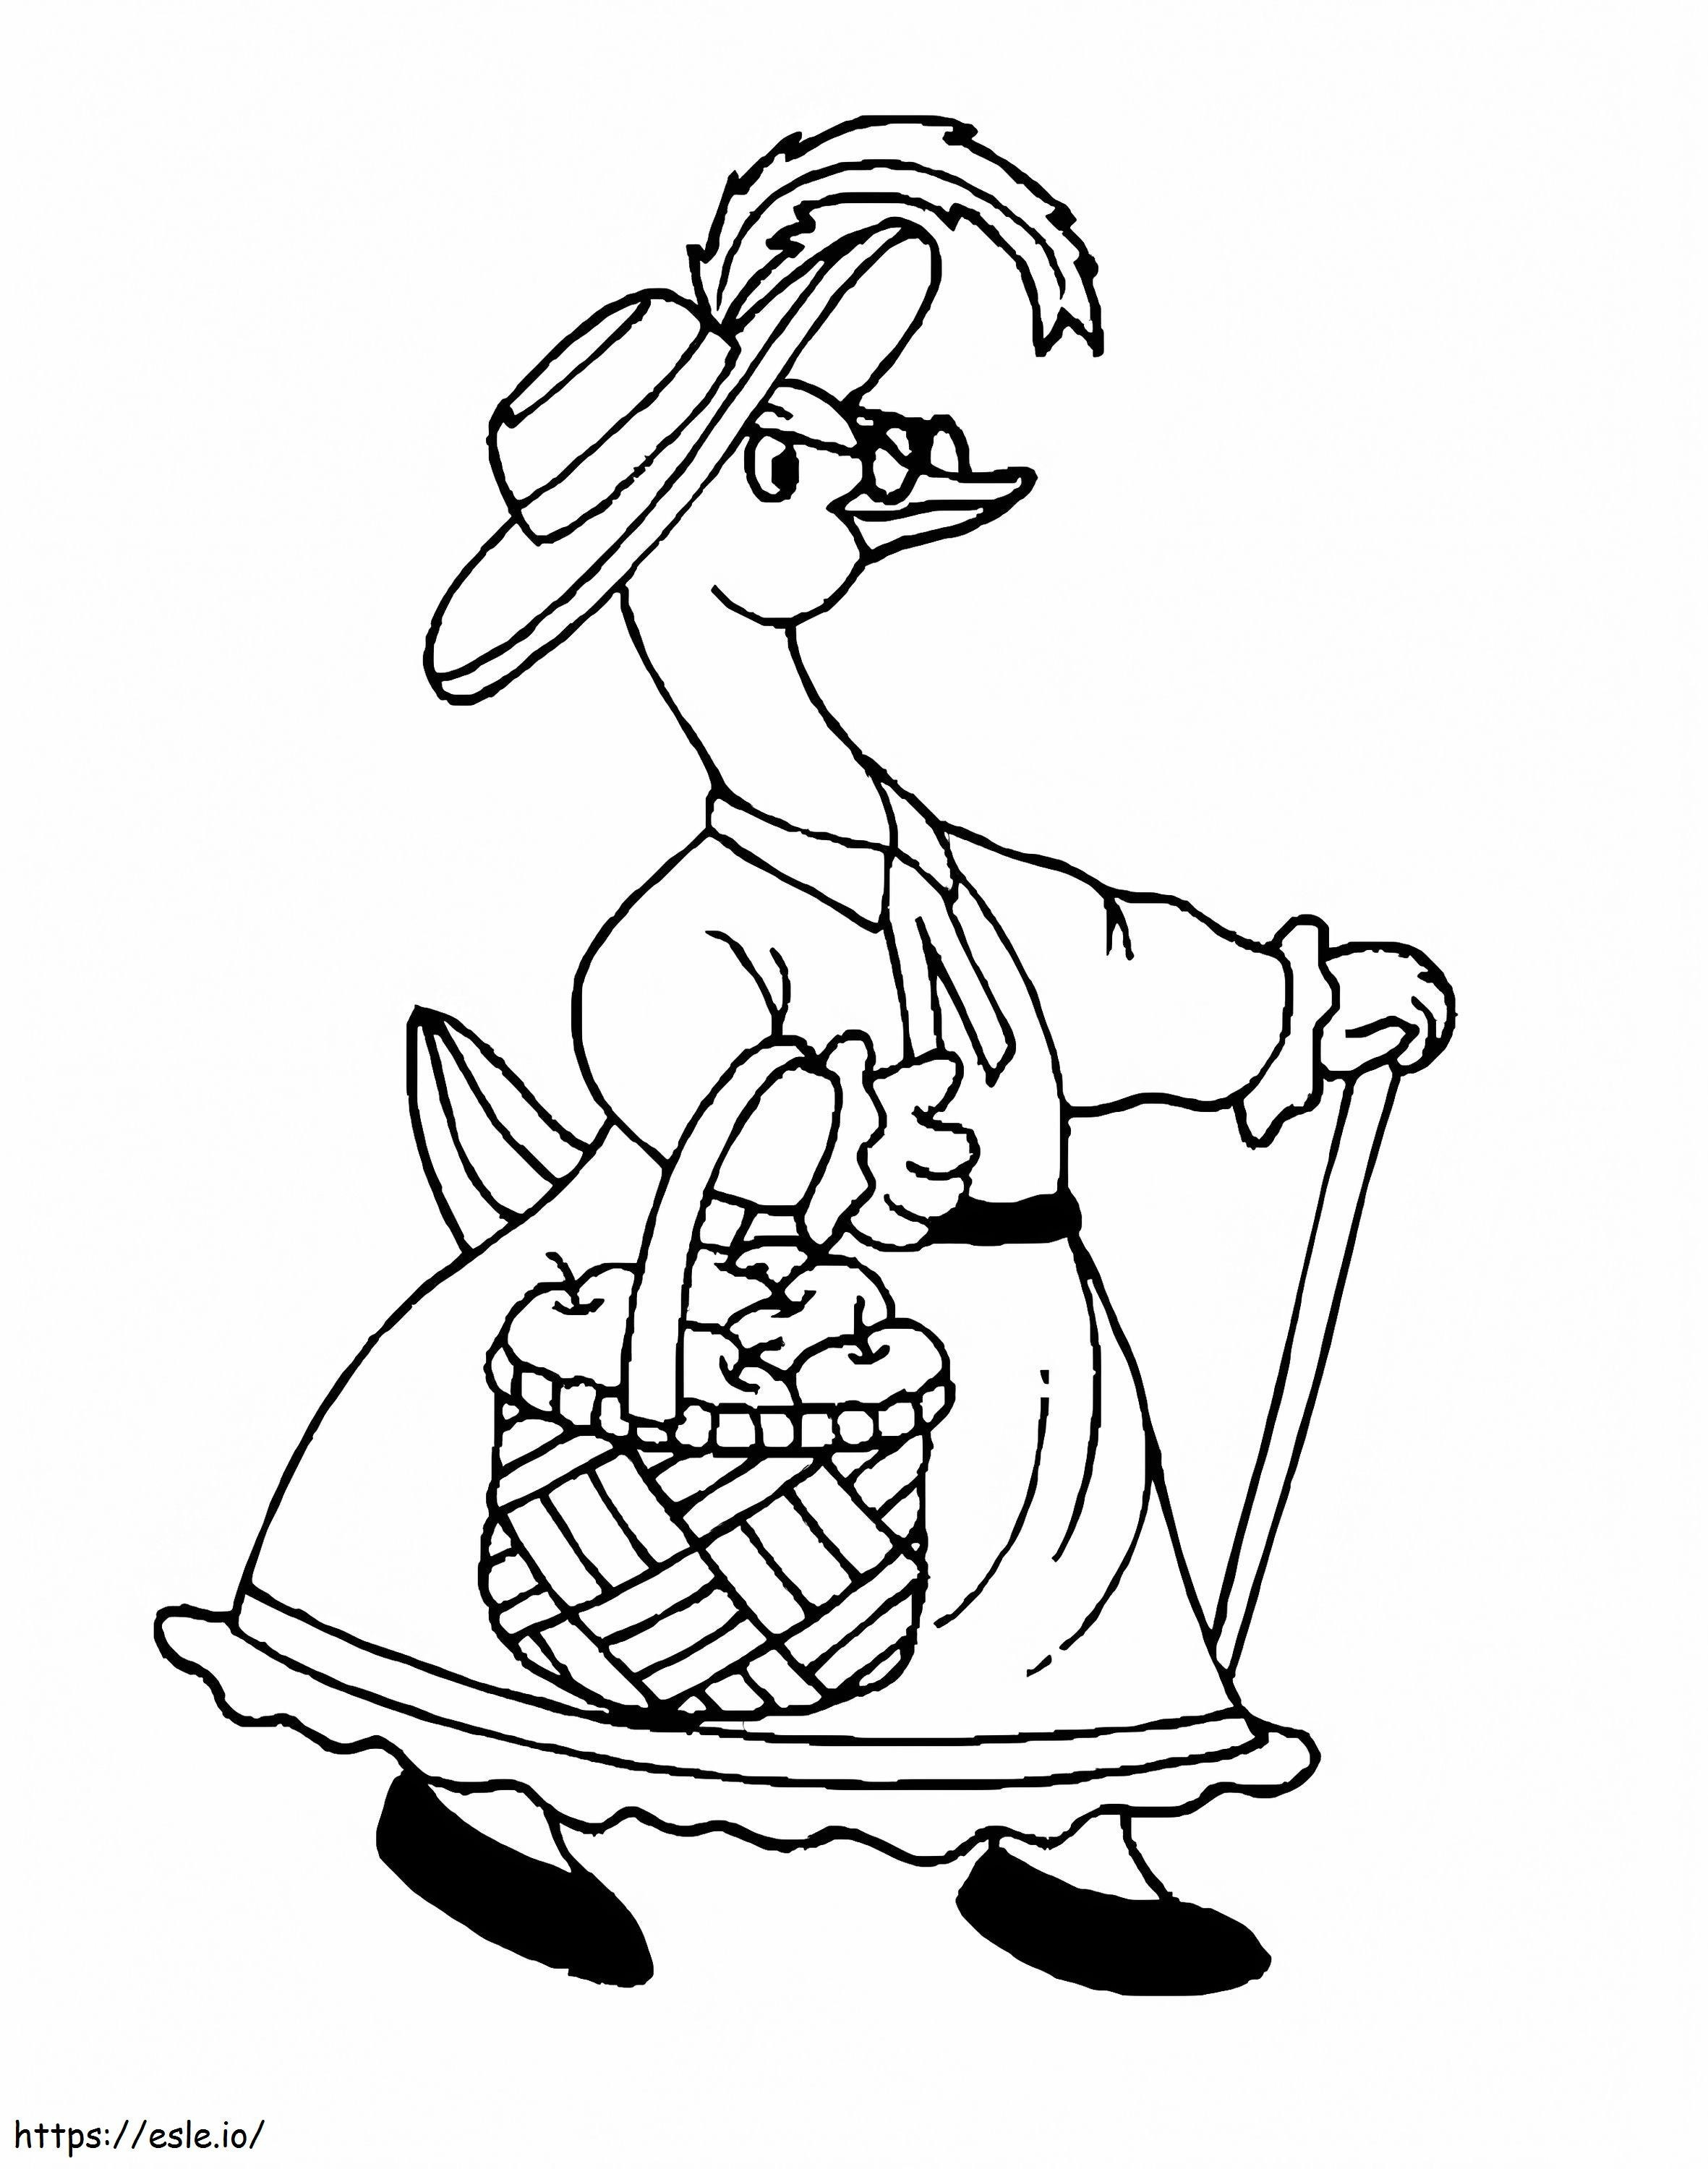 Mother Goose 2 coloring page